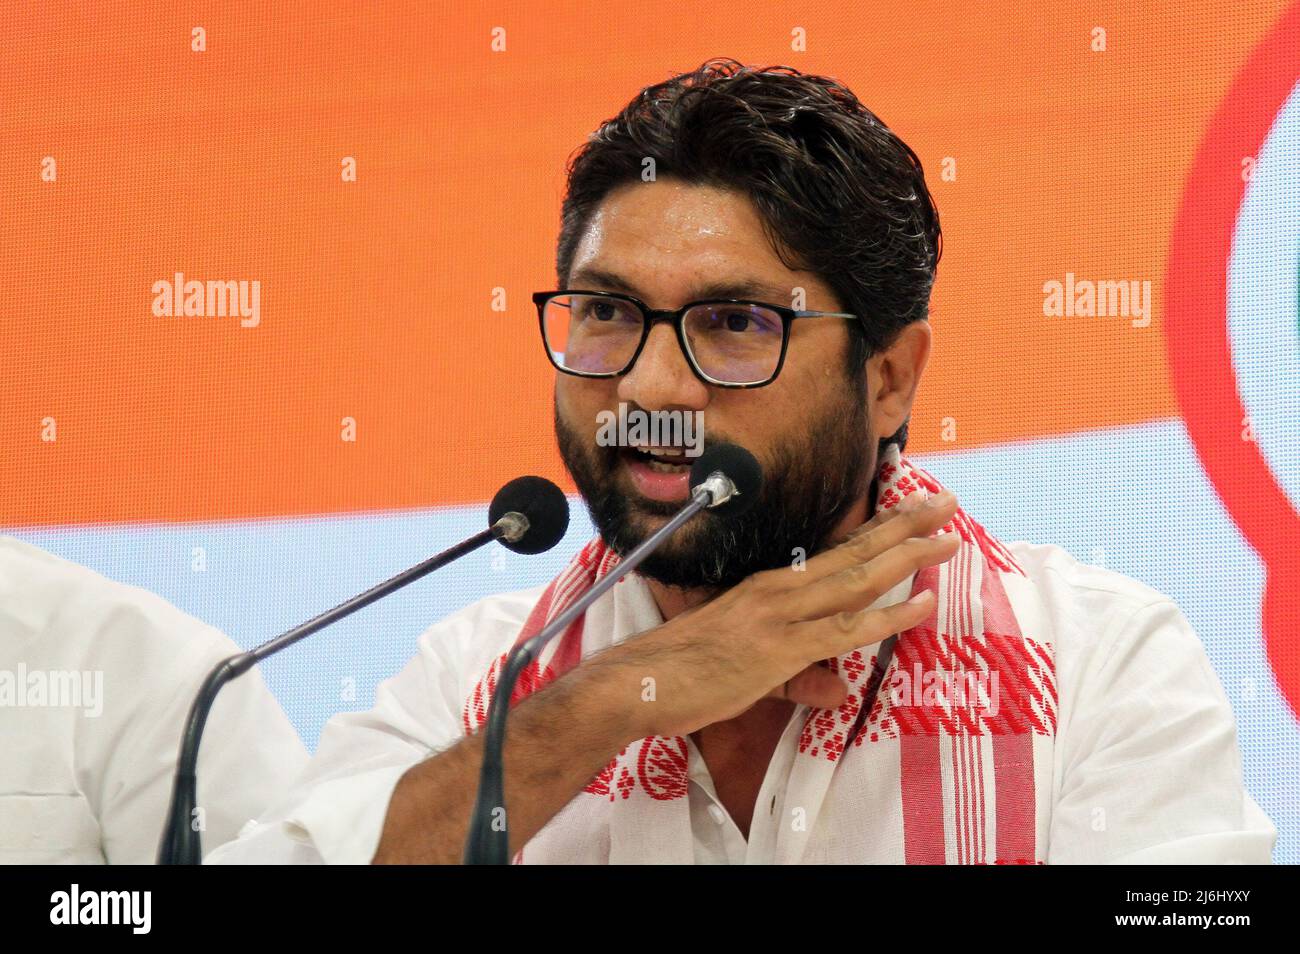 Gujrat independent MLA (Member of Legislative Assembly) Jignesh Mevani address to the media during a press conference at the Indian National Congress party headquarter in New Delhi. After he was released on bail over two cased filed on April 20, 2022 and April 25, 2022 in Assam State. He told the media it was pre planned conspiracy to destroy him and also slammed the central Prime Minister Narendra Modi's government. Stock Photo